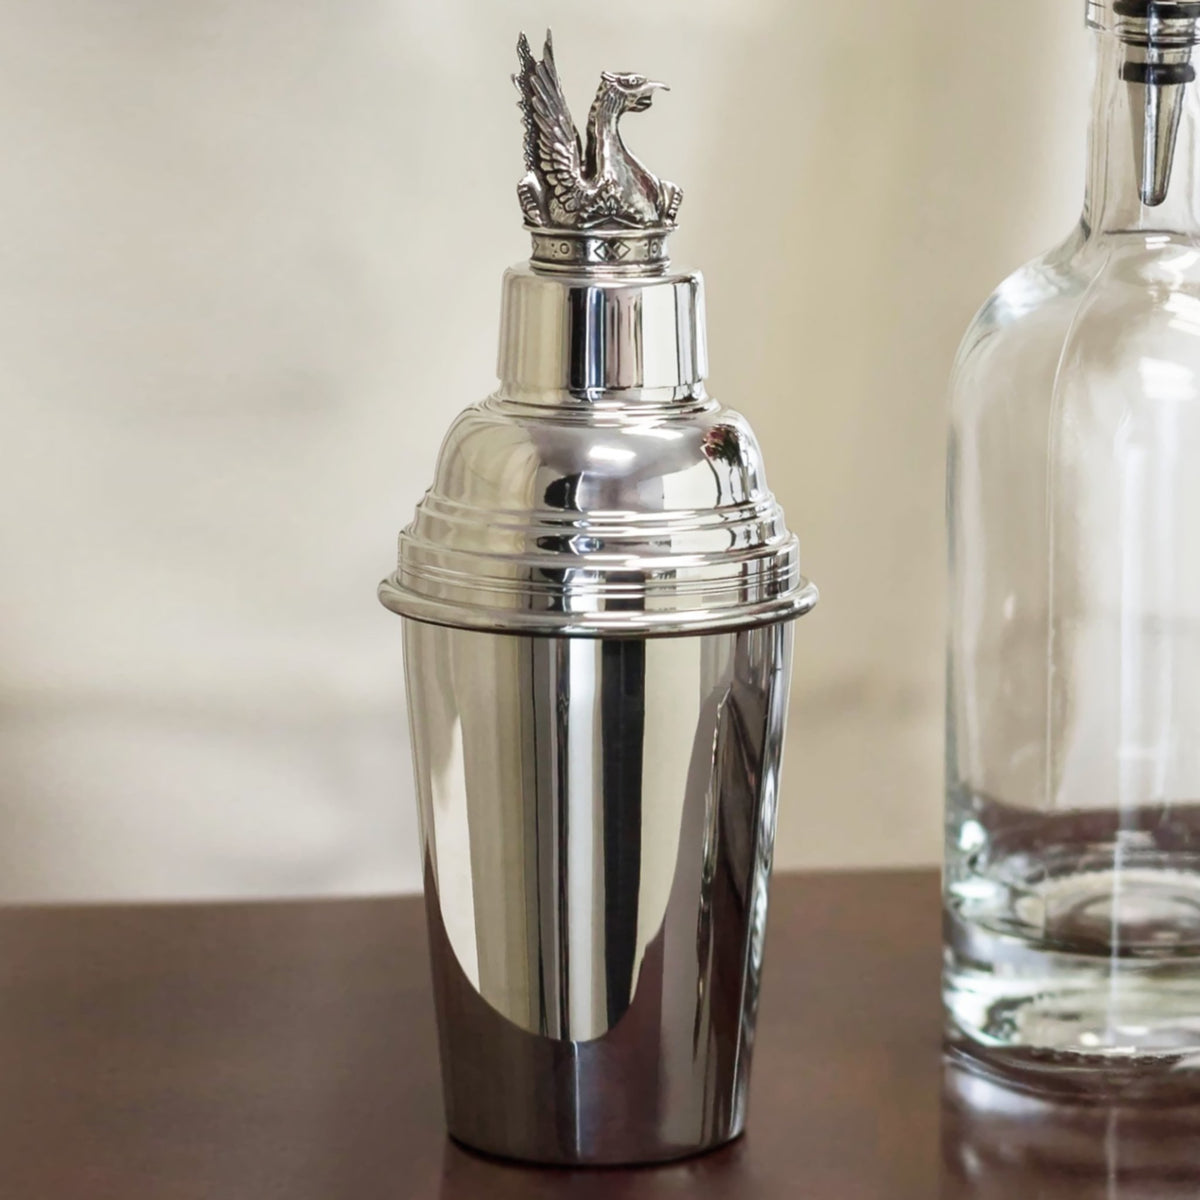 Antique Silver Cocktail Shakers - My French Country Home Box